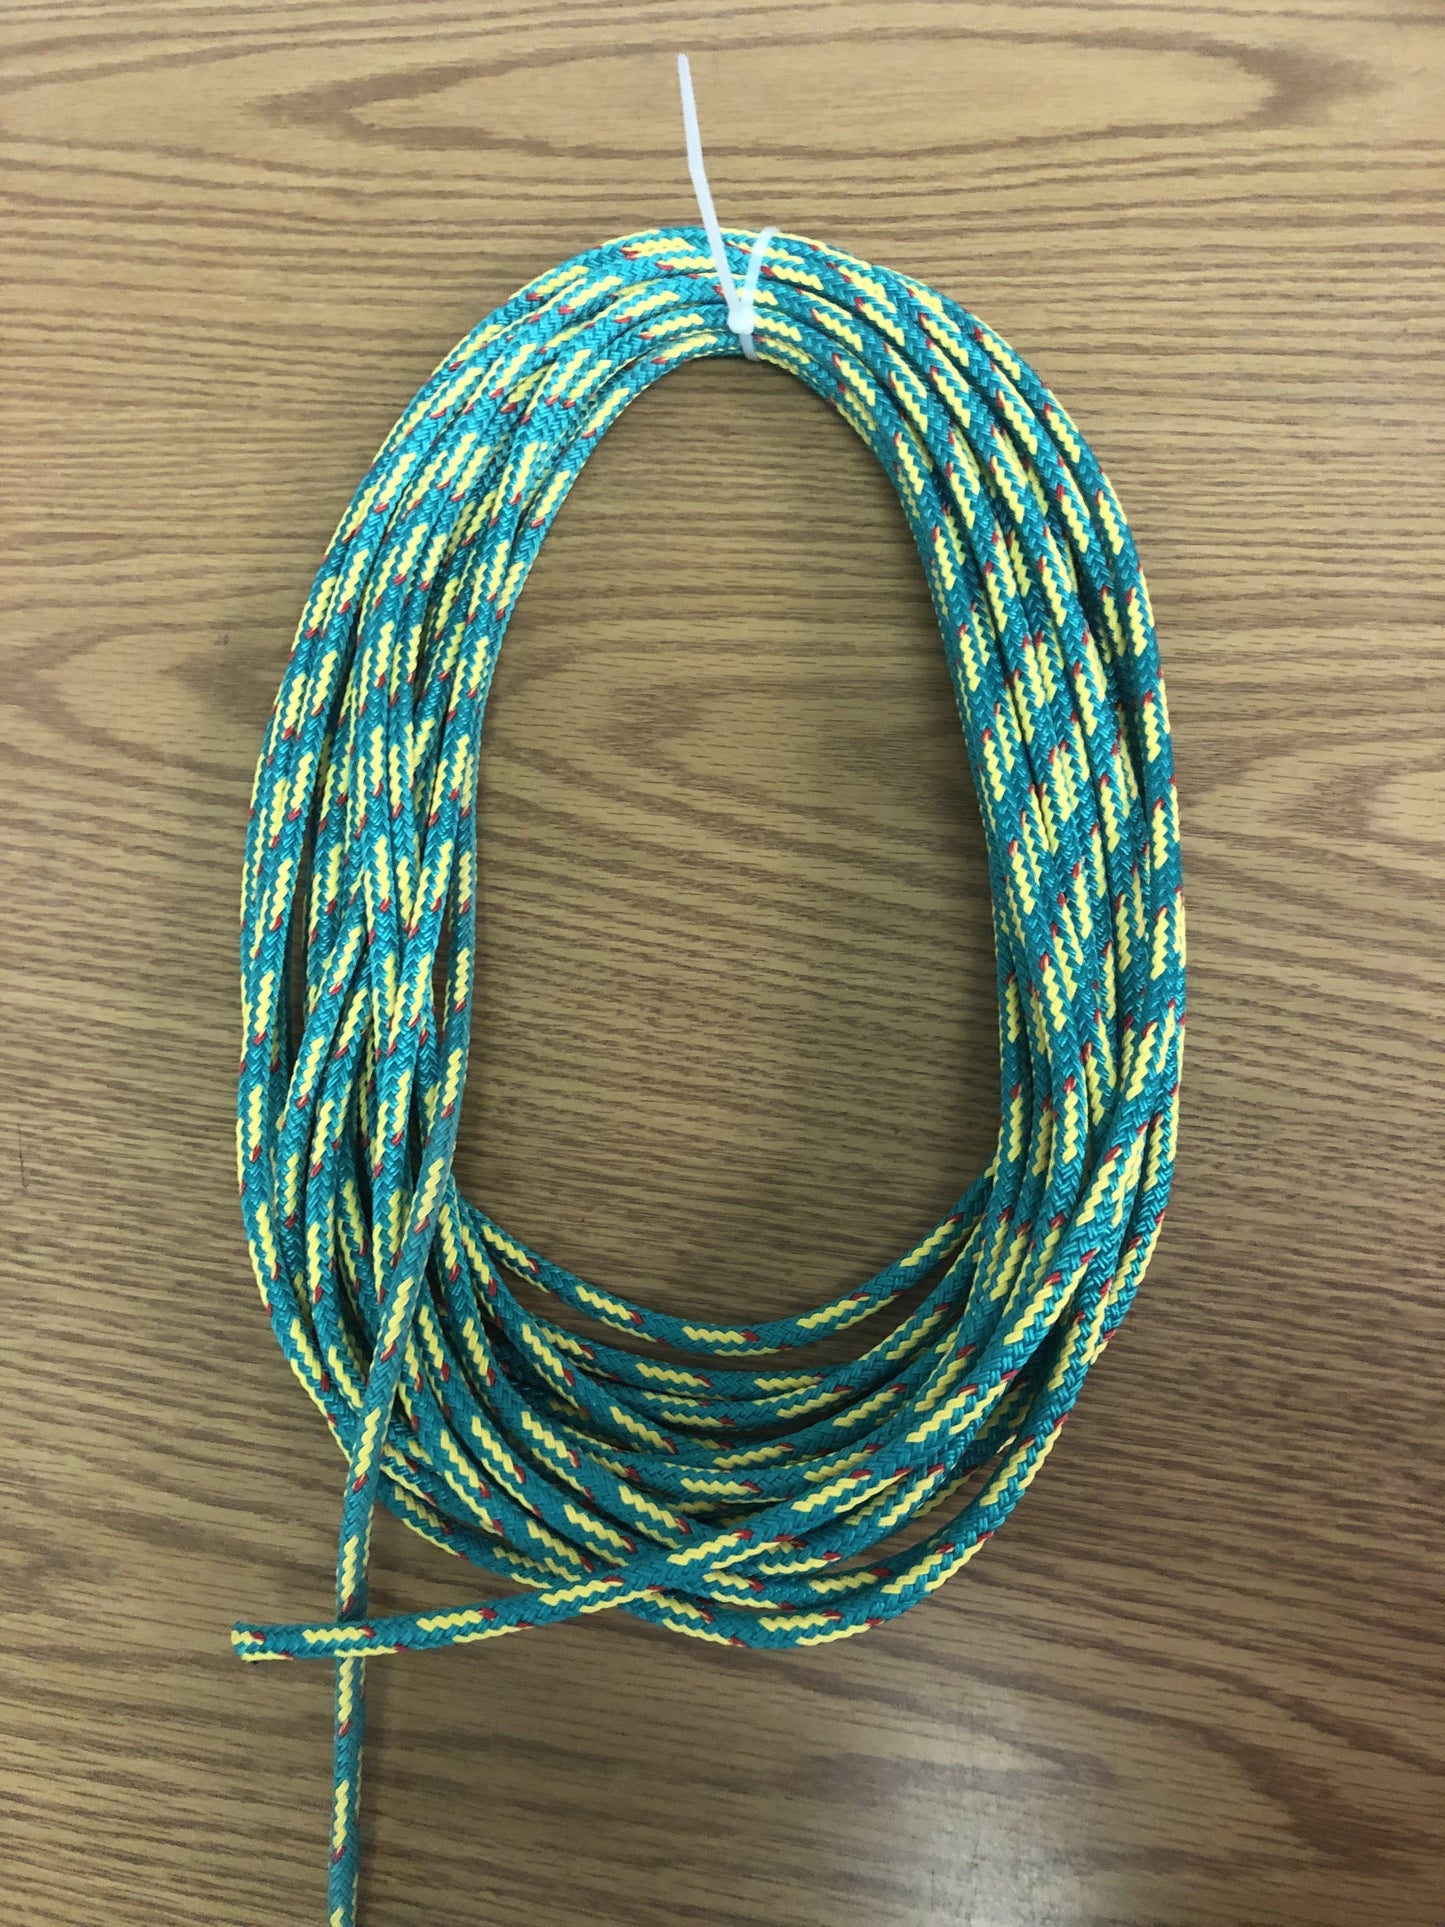 Lightning Continuous Spinnaker Sheet Flight Line 6mm Parts New England Ropes Starboard-Green 